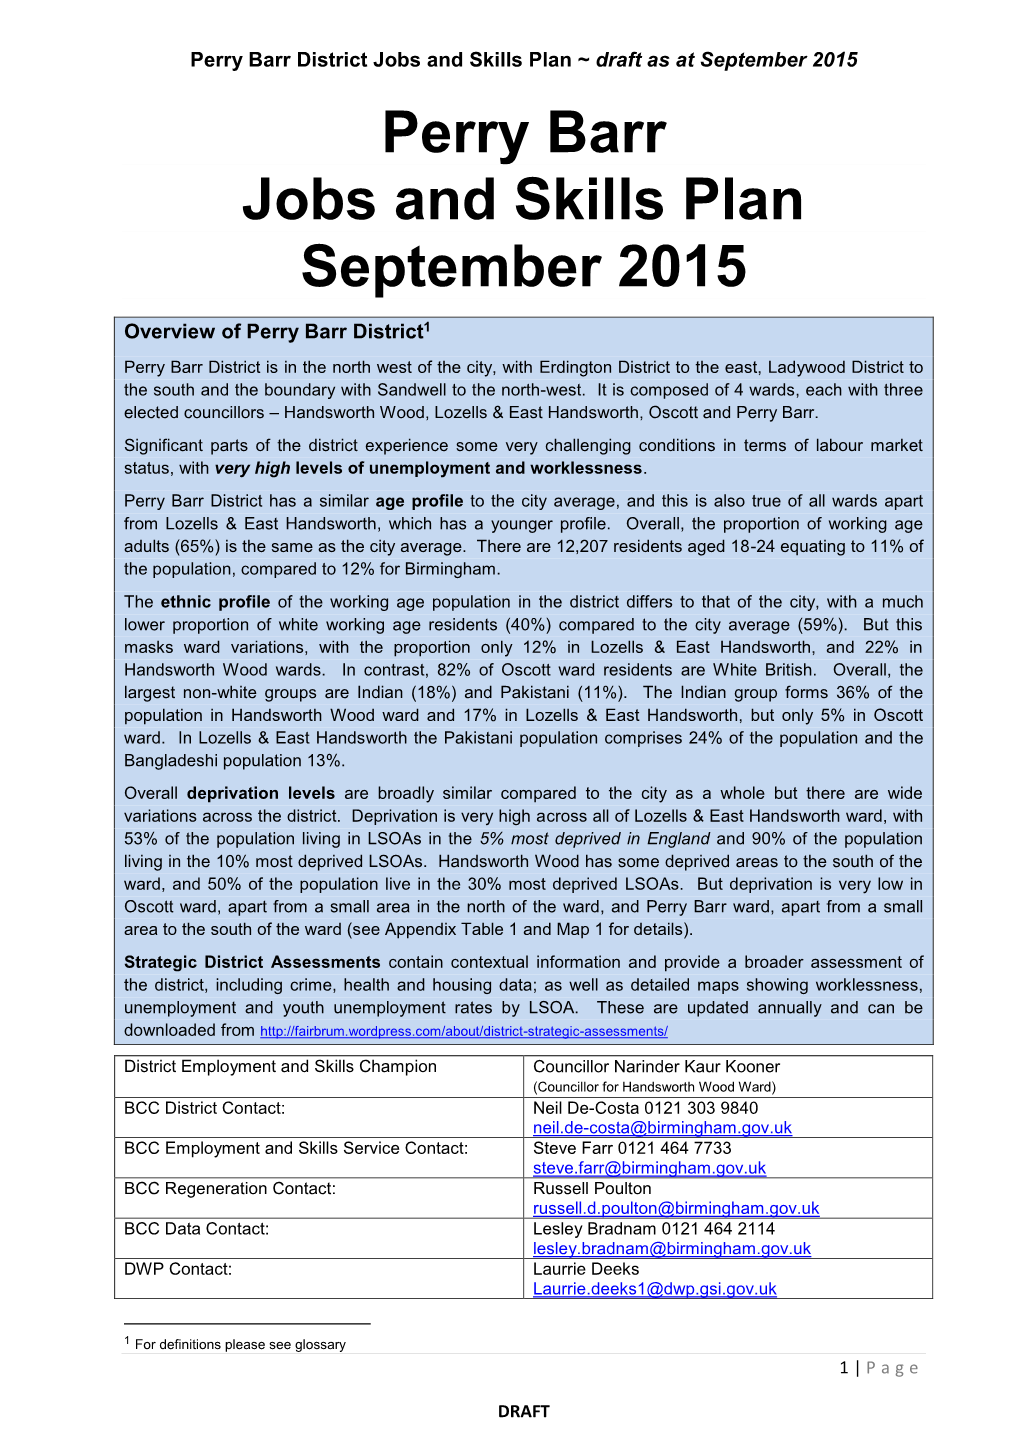 Perry Barr Jobs and Skills Plan September 2015